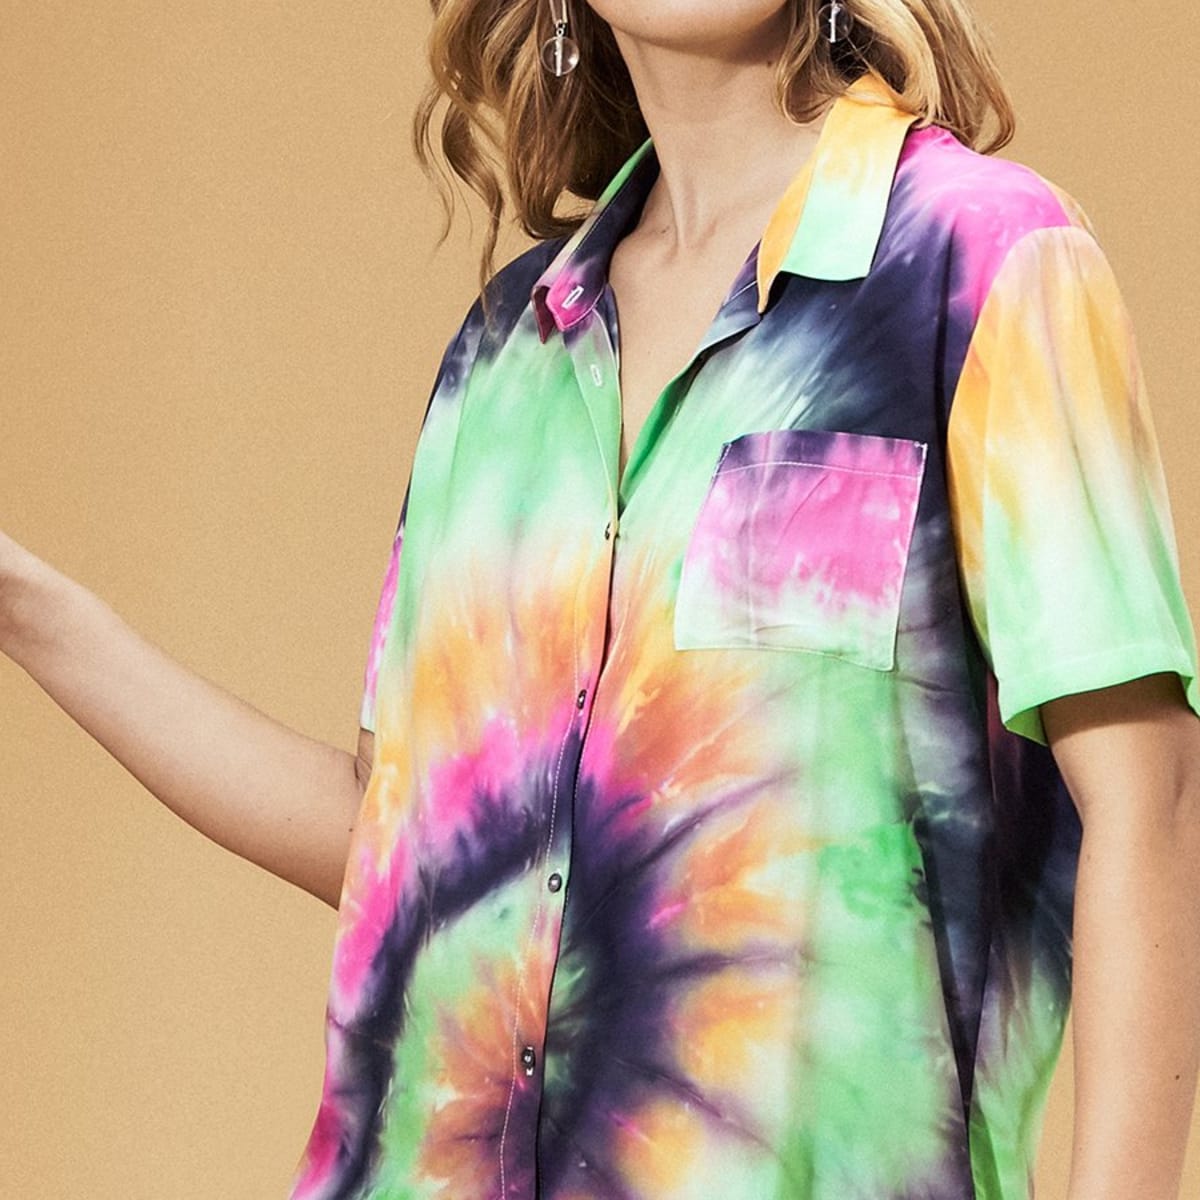 19 Tie-Dye Bathing Suits to Bring Your Trippy Summer Aesthetic to